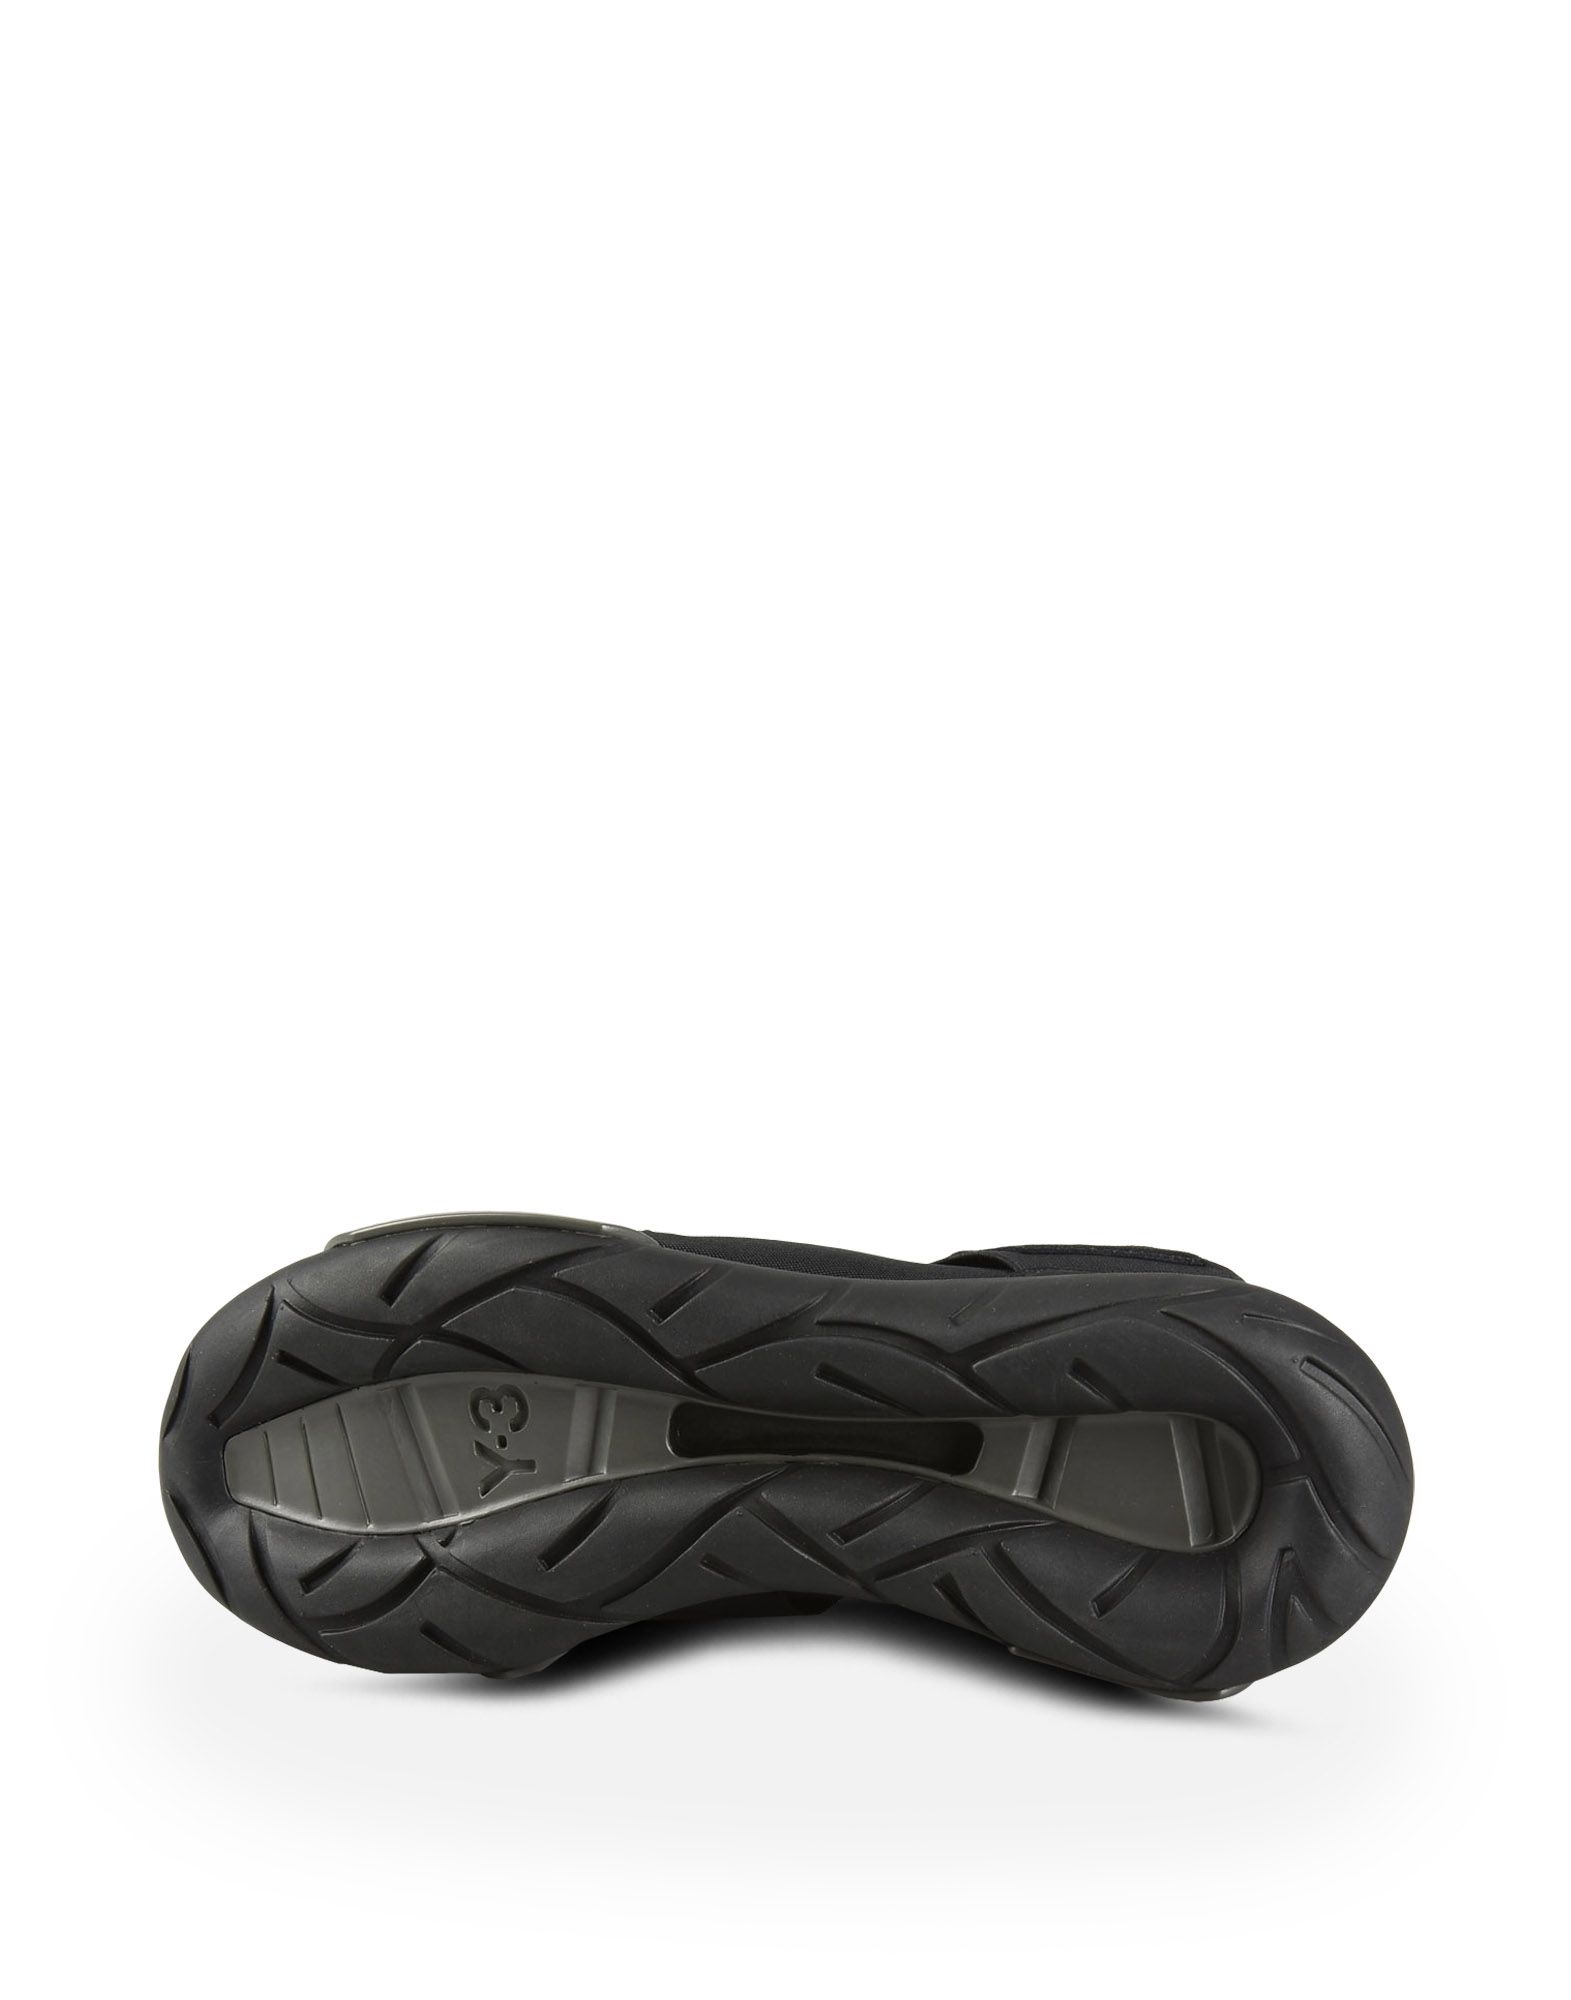 Y-3 Qasa High Trainers in Black for Men | Adidas Y-3 Official Store